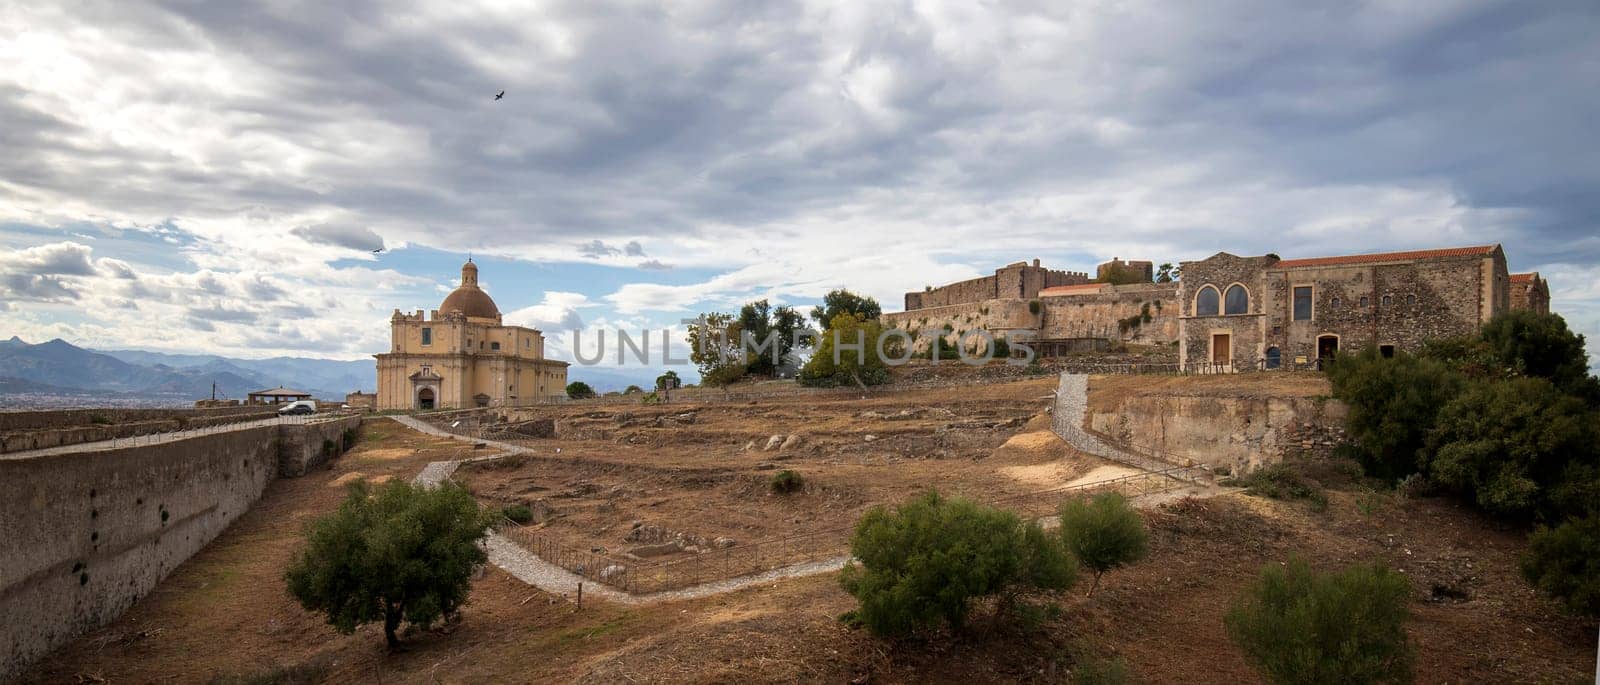 Panoramic view of the yard with cathedral and a Benedictine convent inside at Castle of Milazzo, Sicily.  by EdVal